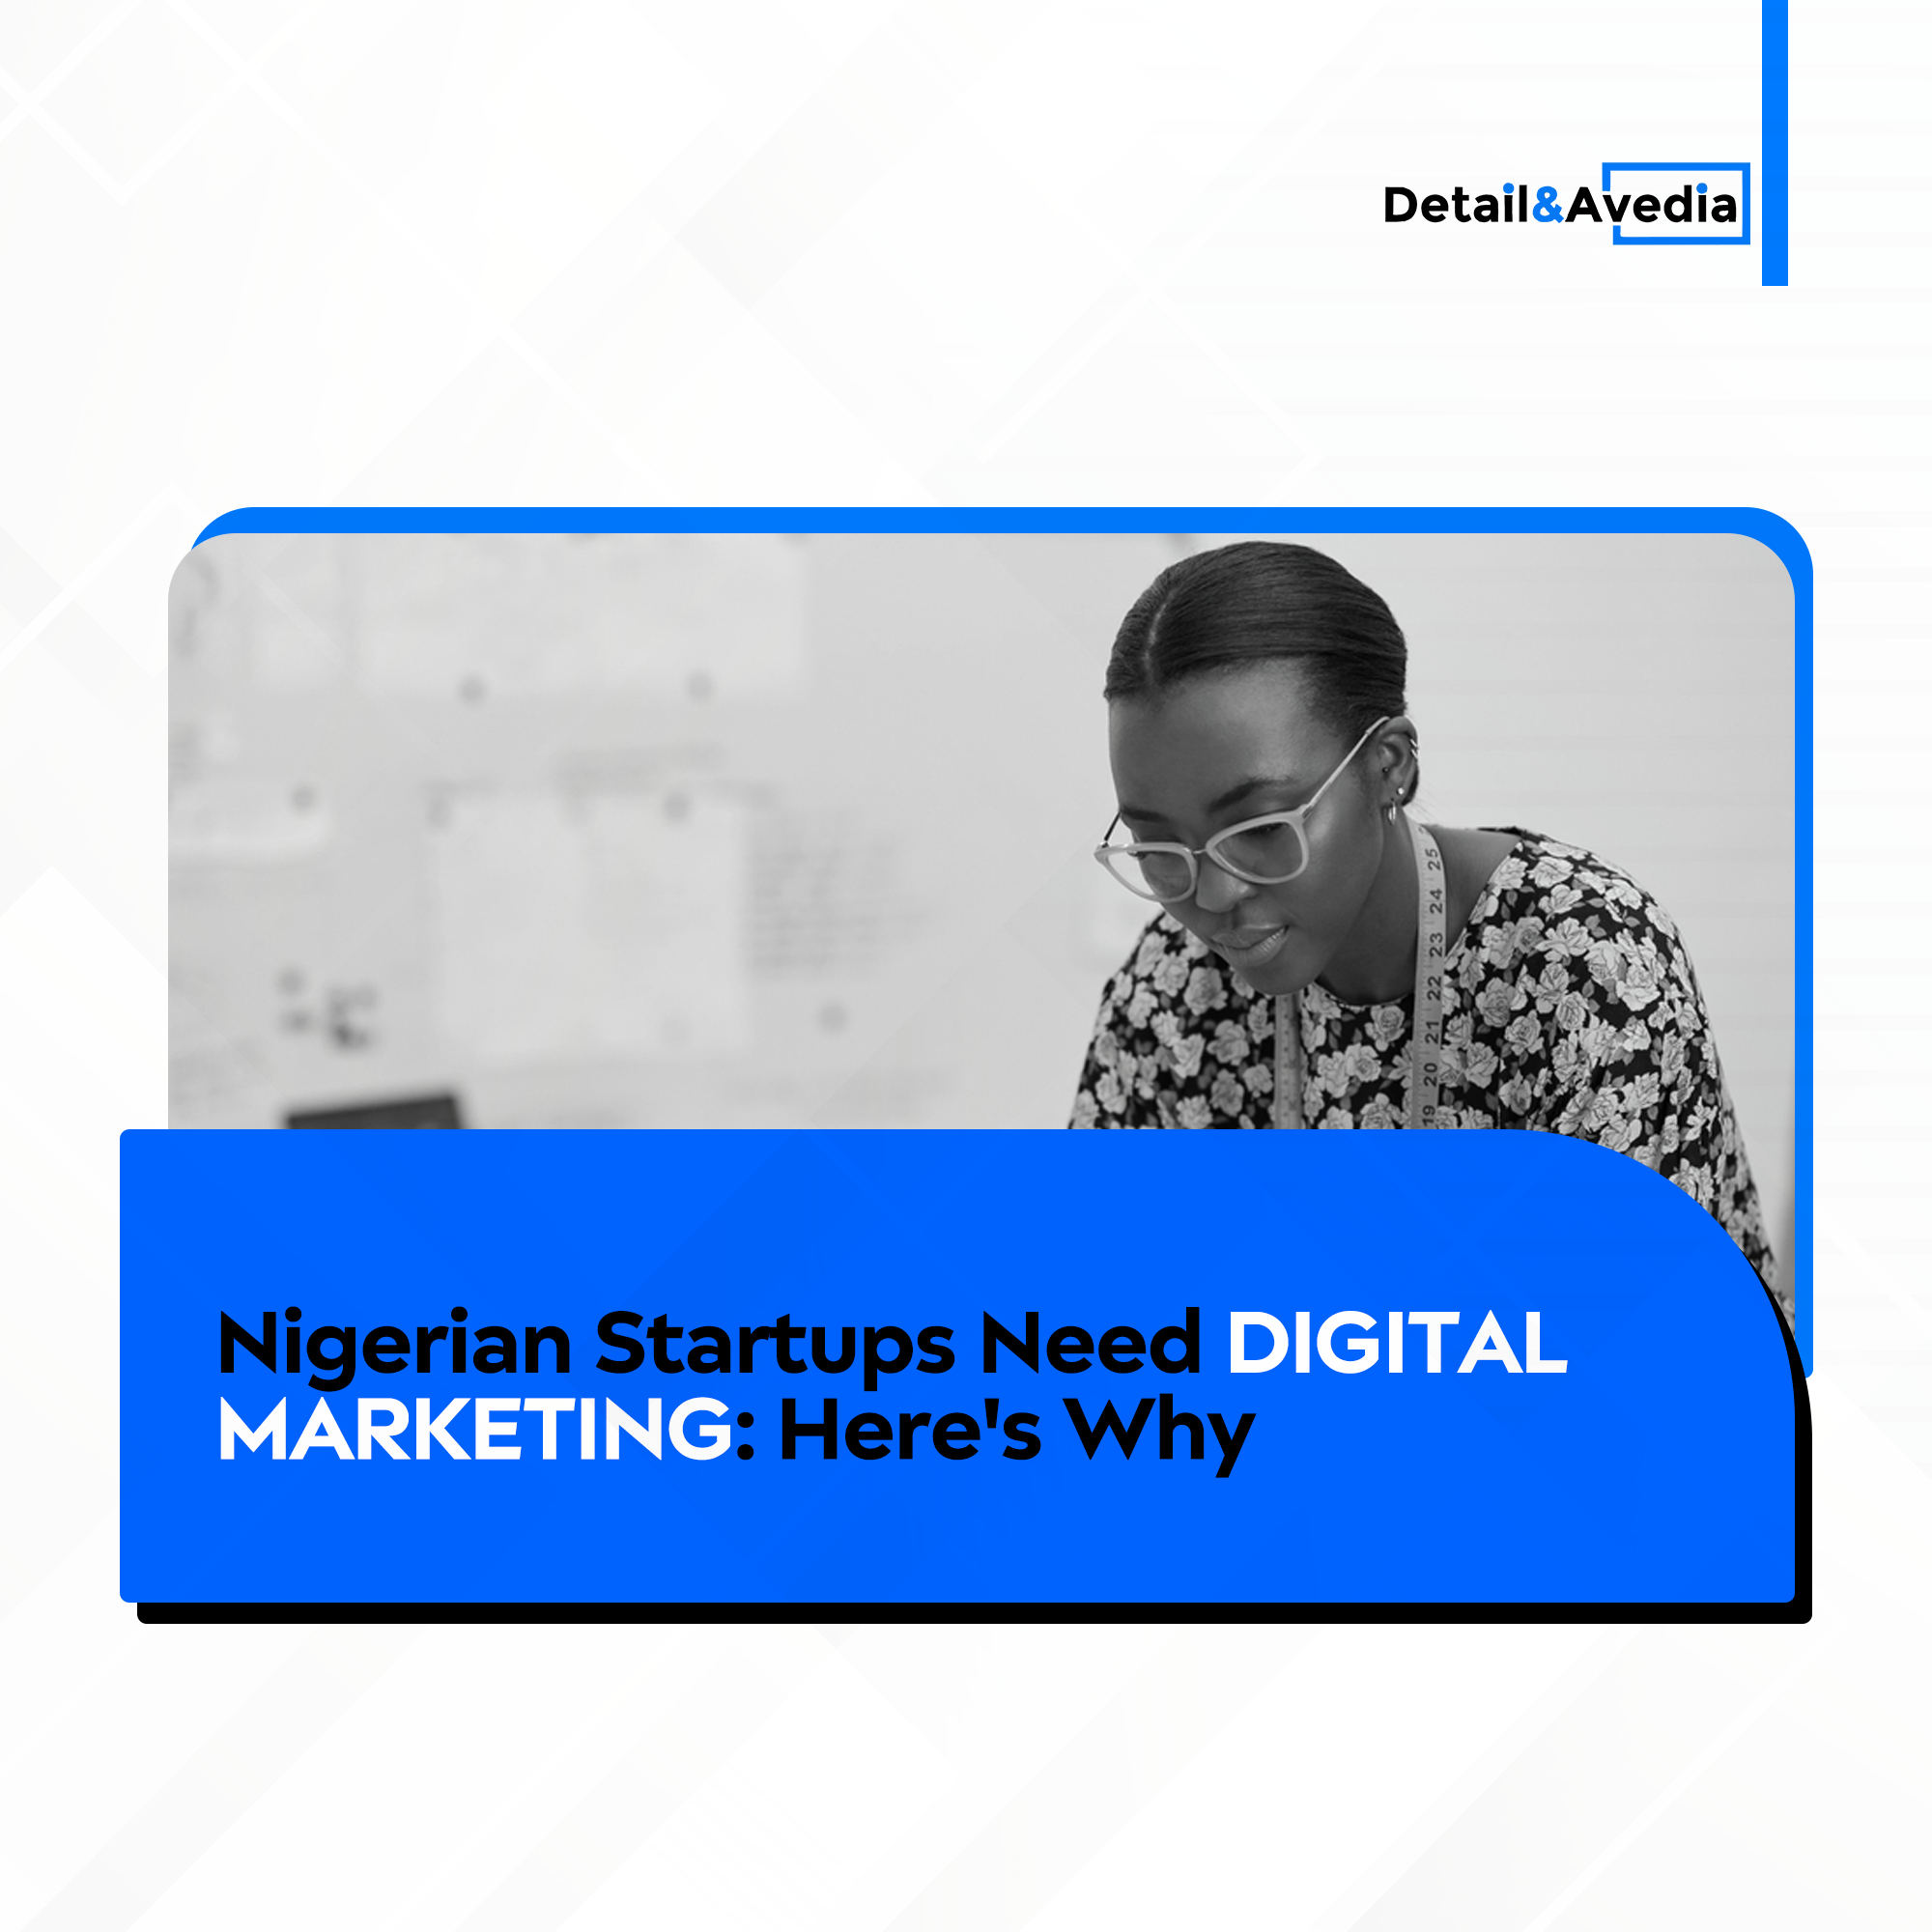 Detail and Avedia graphics for blog post. Nigerian startups need digital marketing: Here's why. Image of a Nigerian fashion designer representing a startup entrepreneur.